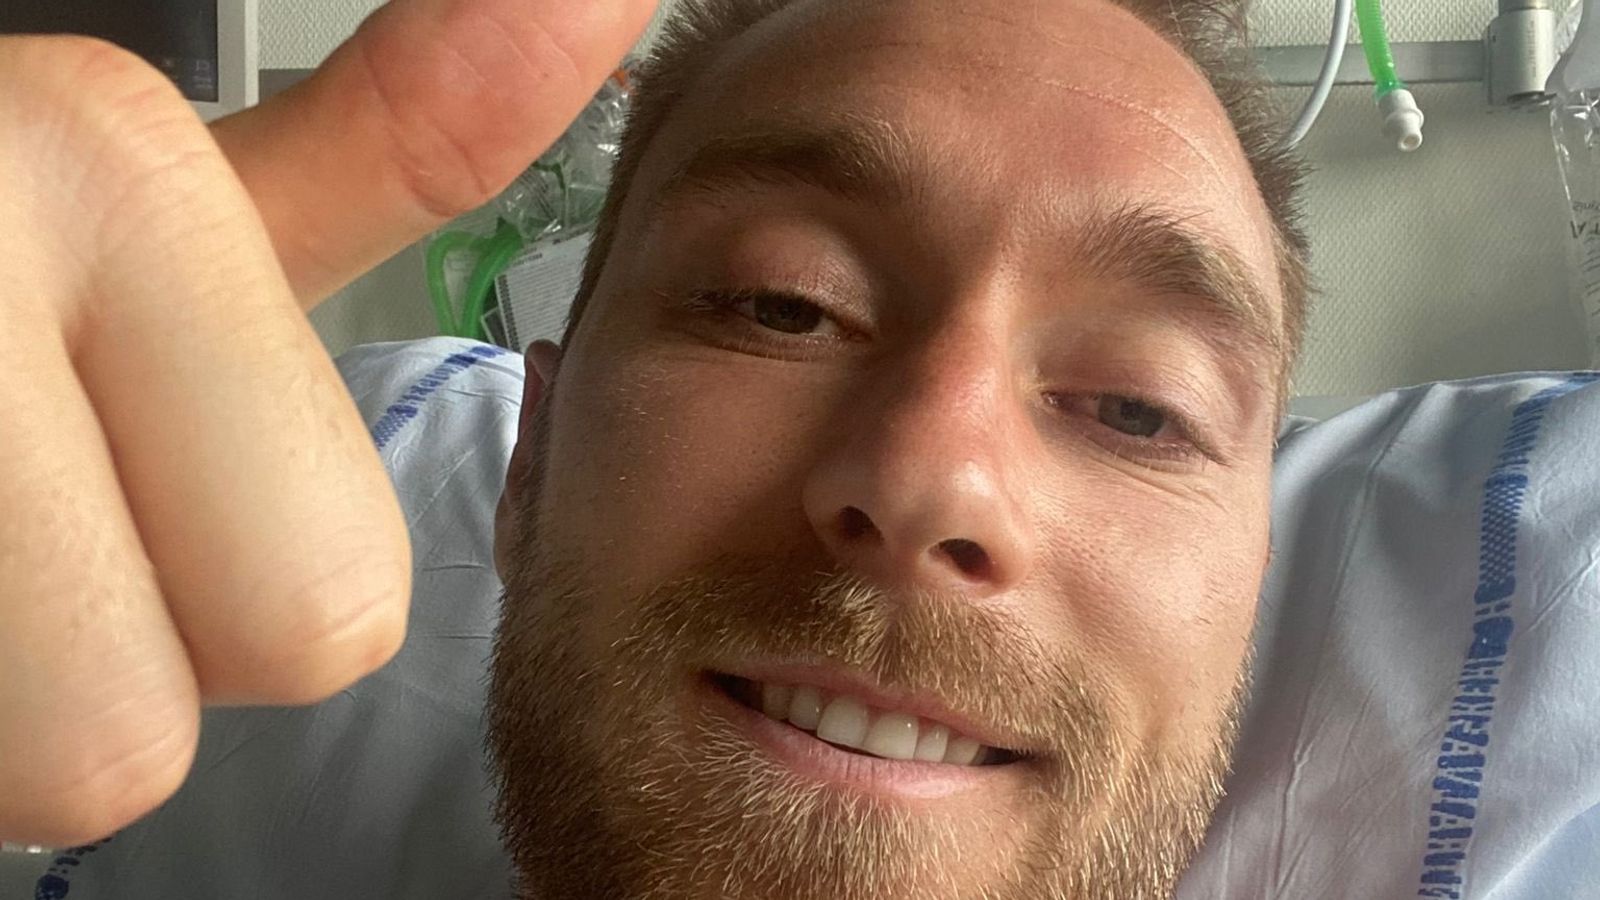 Christian Eriksen to be fitted with an under-skin ‘heart starter’ after going into cardiac arrest during Euro 2020 match